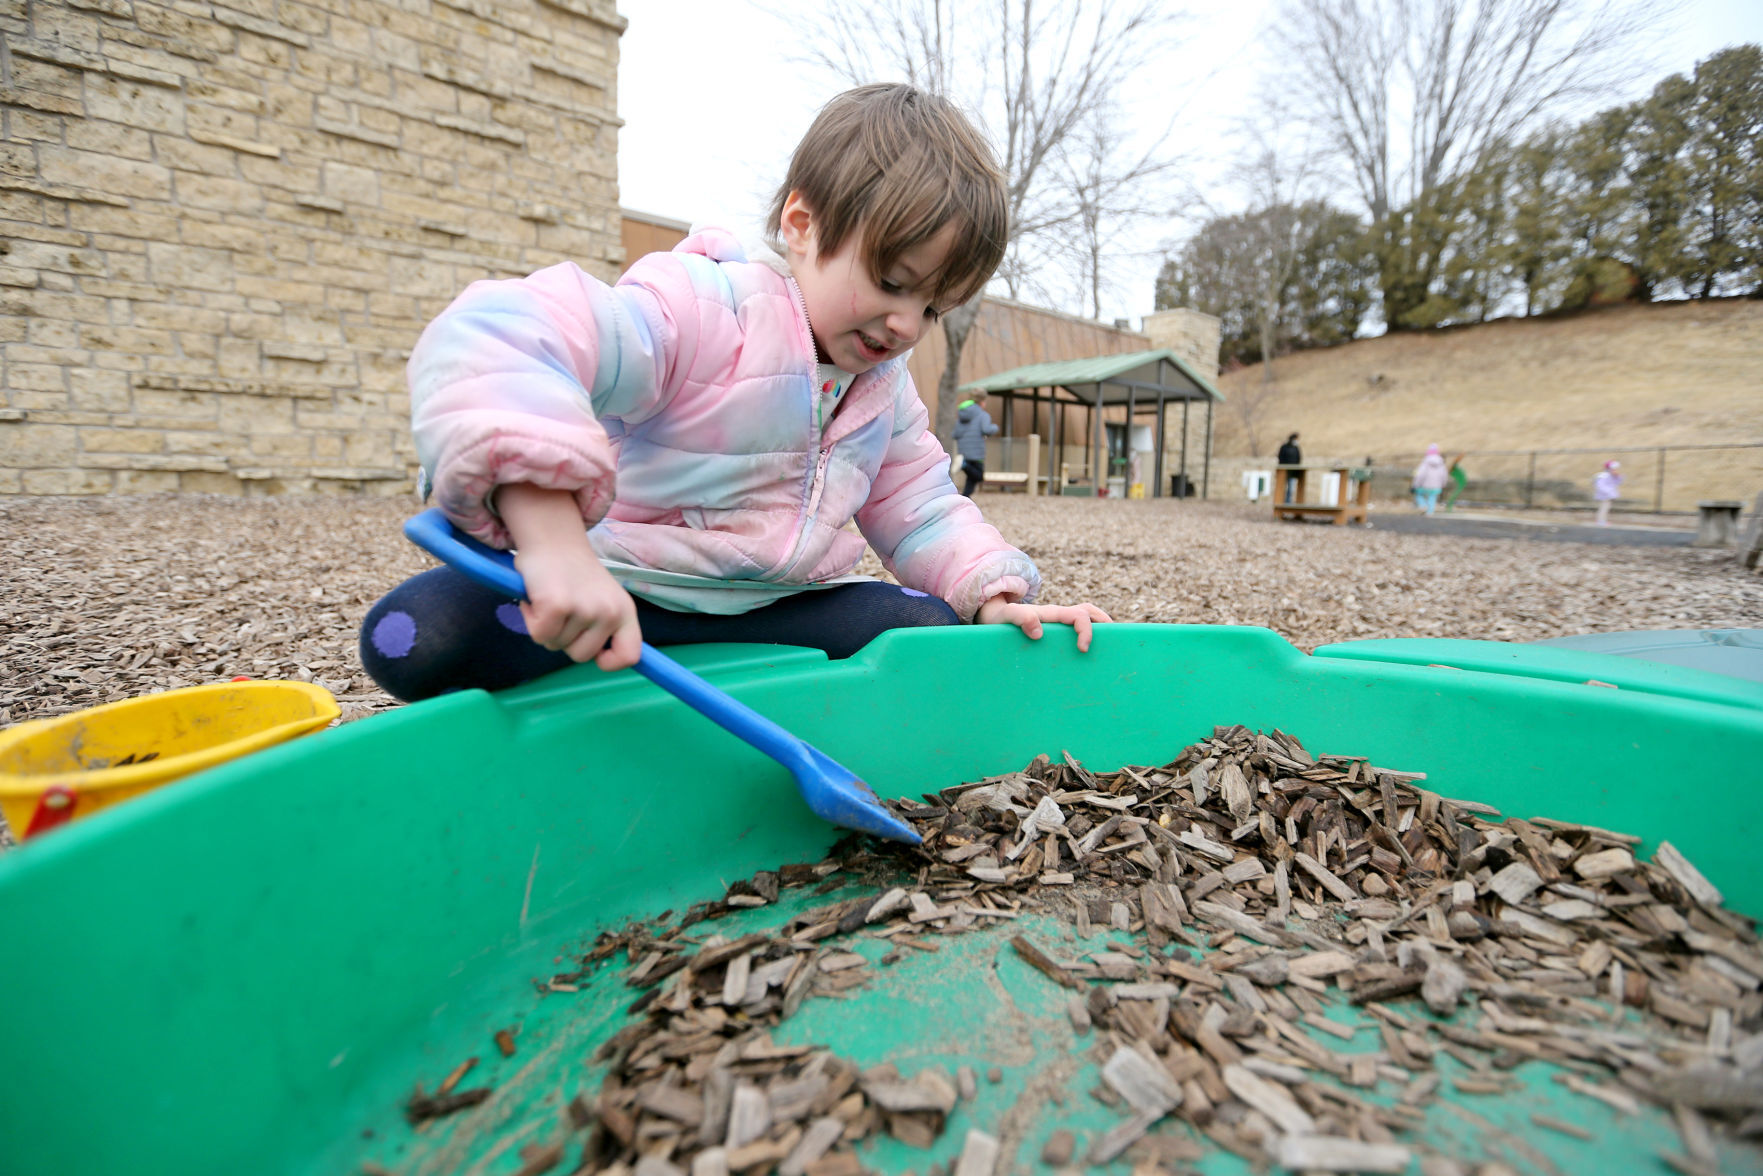 Cora Peil, 5, plays outside at Hills & Dales